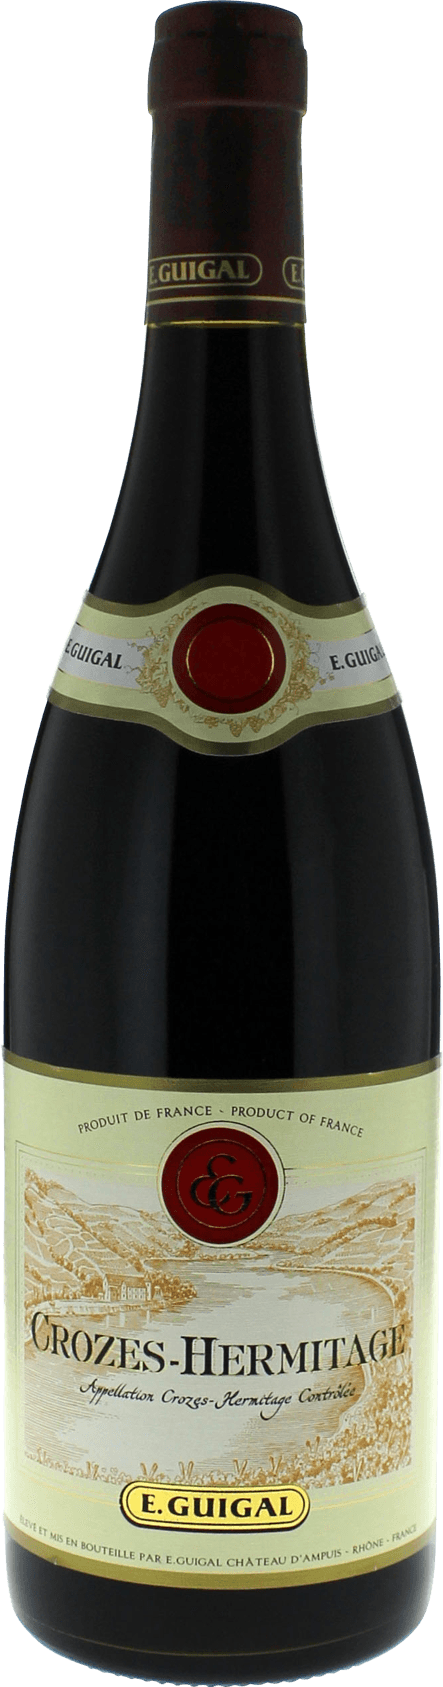 Crozes hermitage rouge e. guigal 2015  Crozes Hermitage, Slection Valle du Rhone rouge